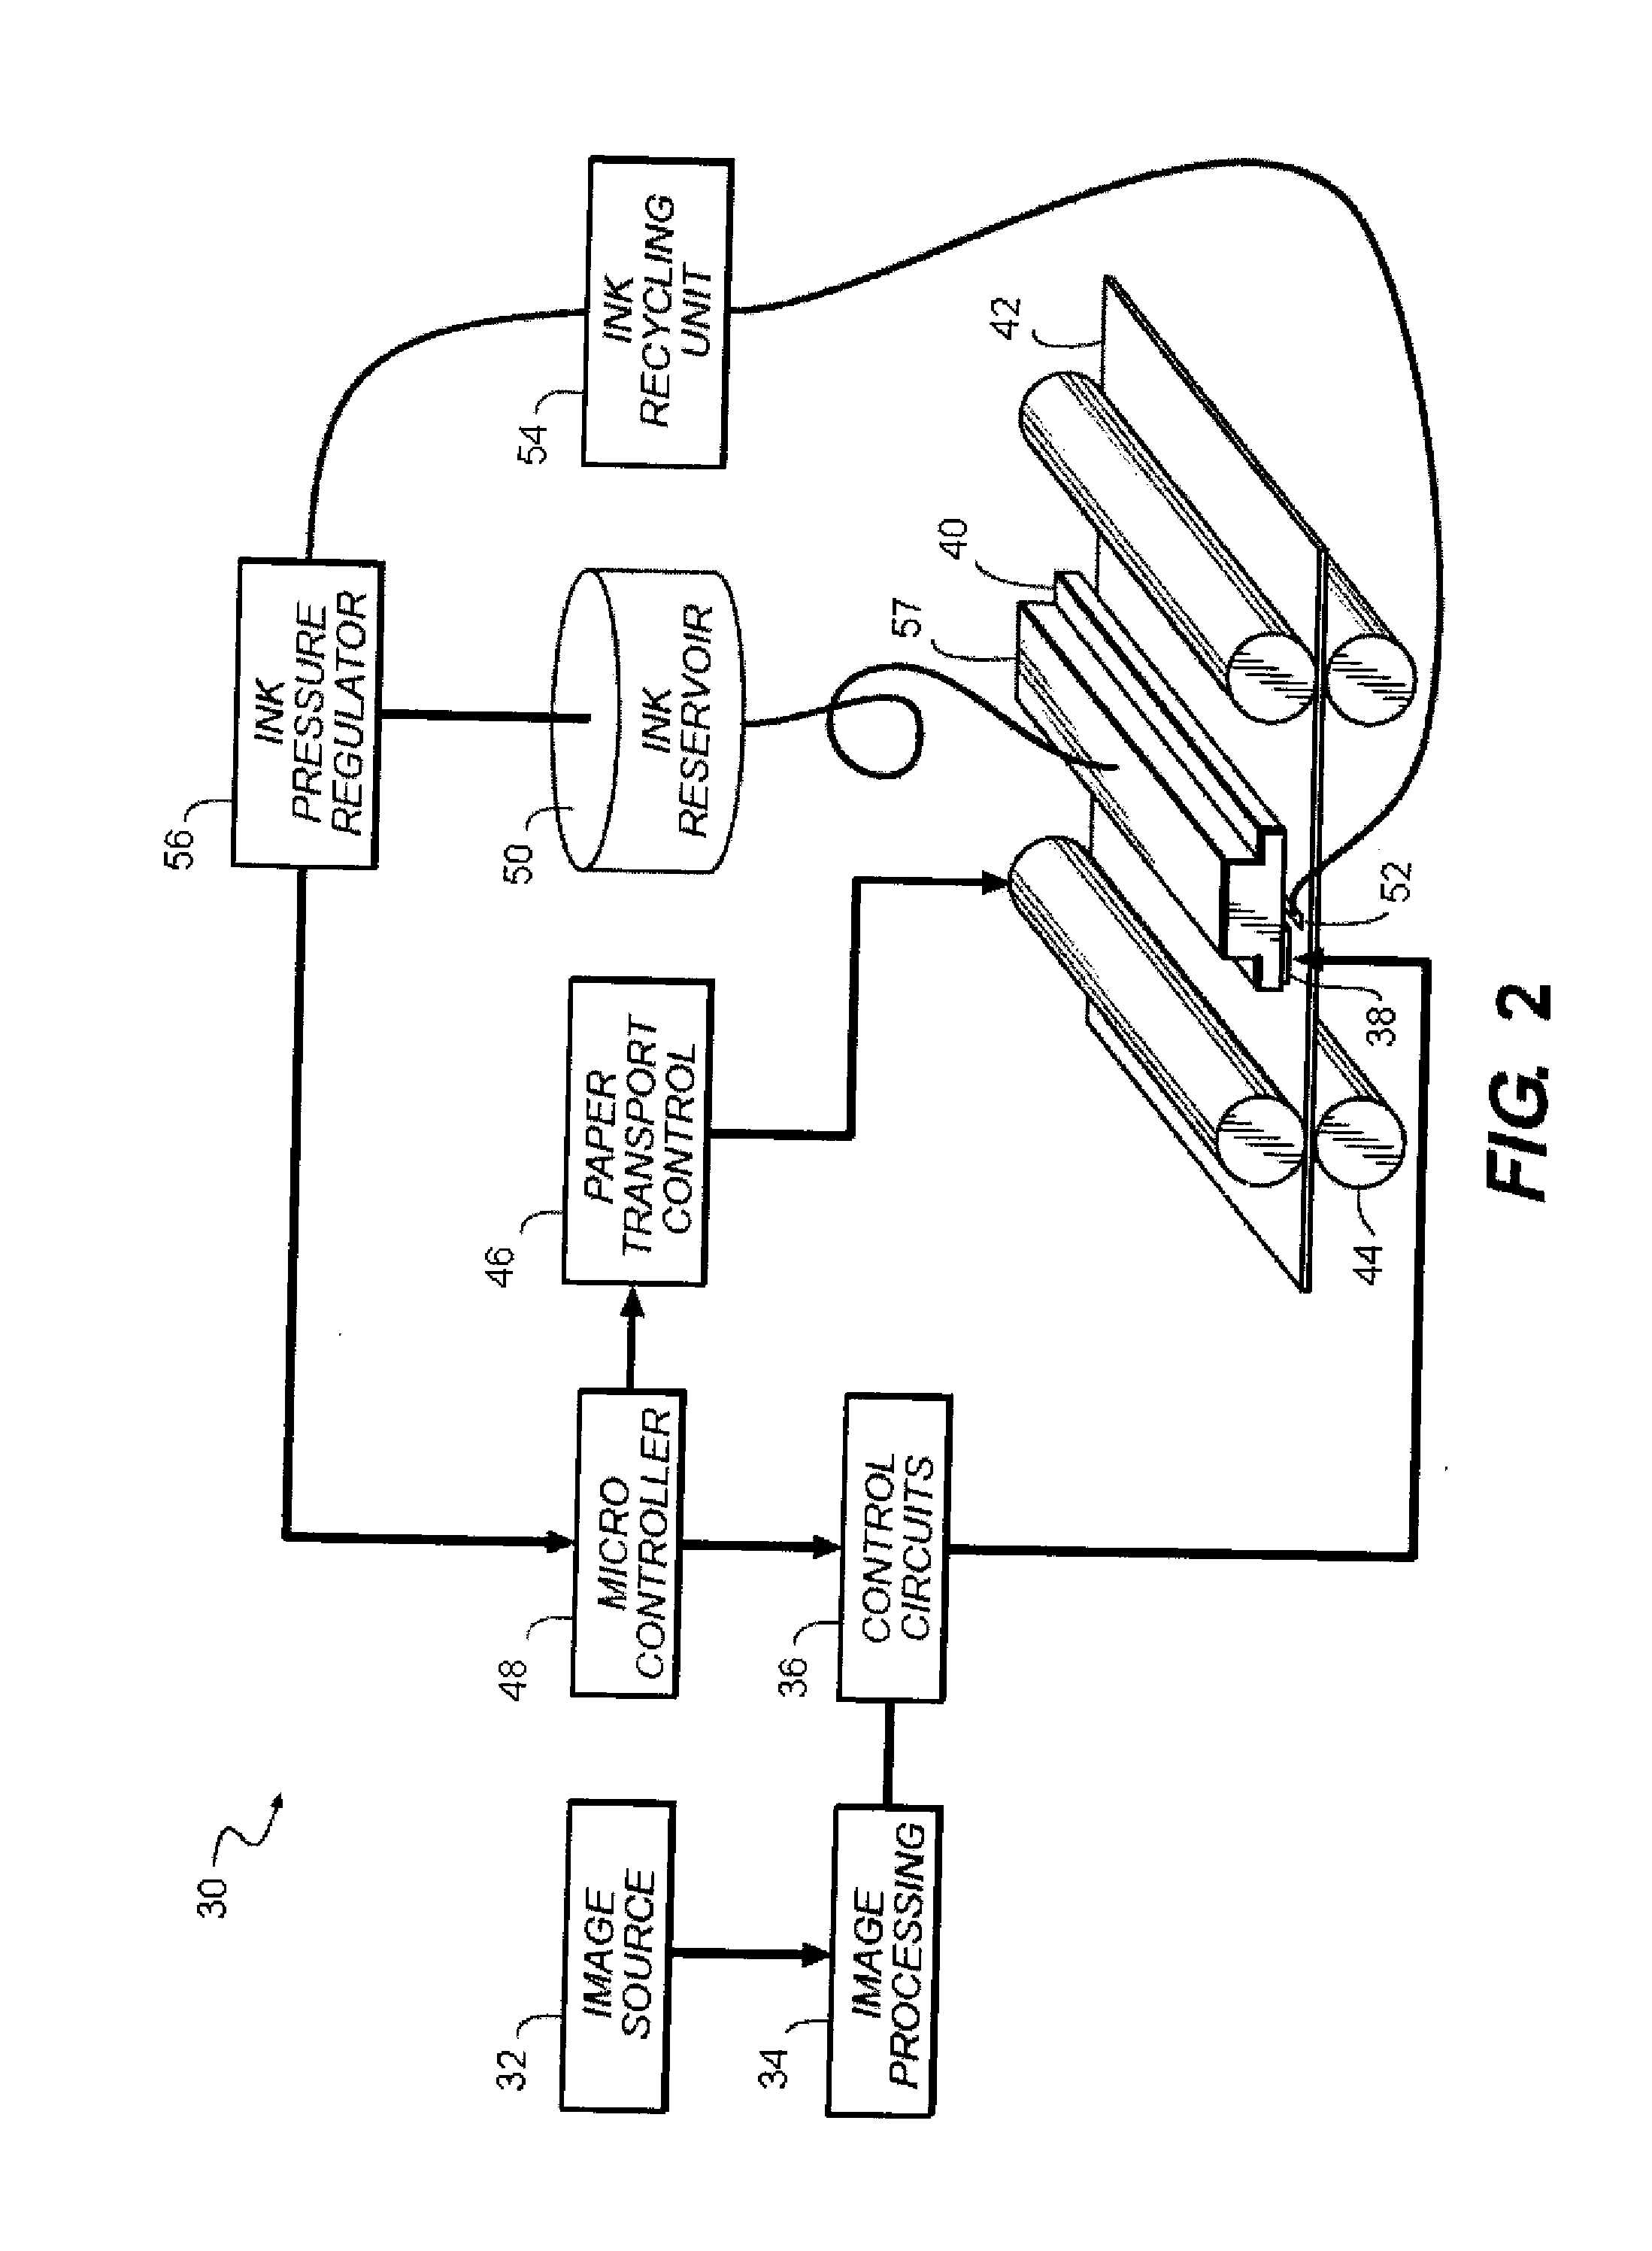 Microfluidic device with multilayer coating